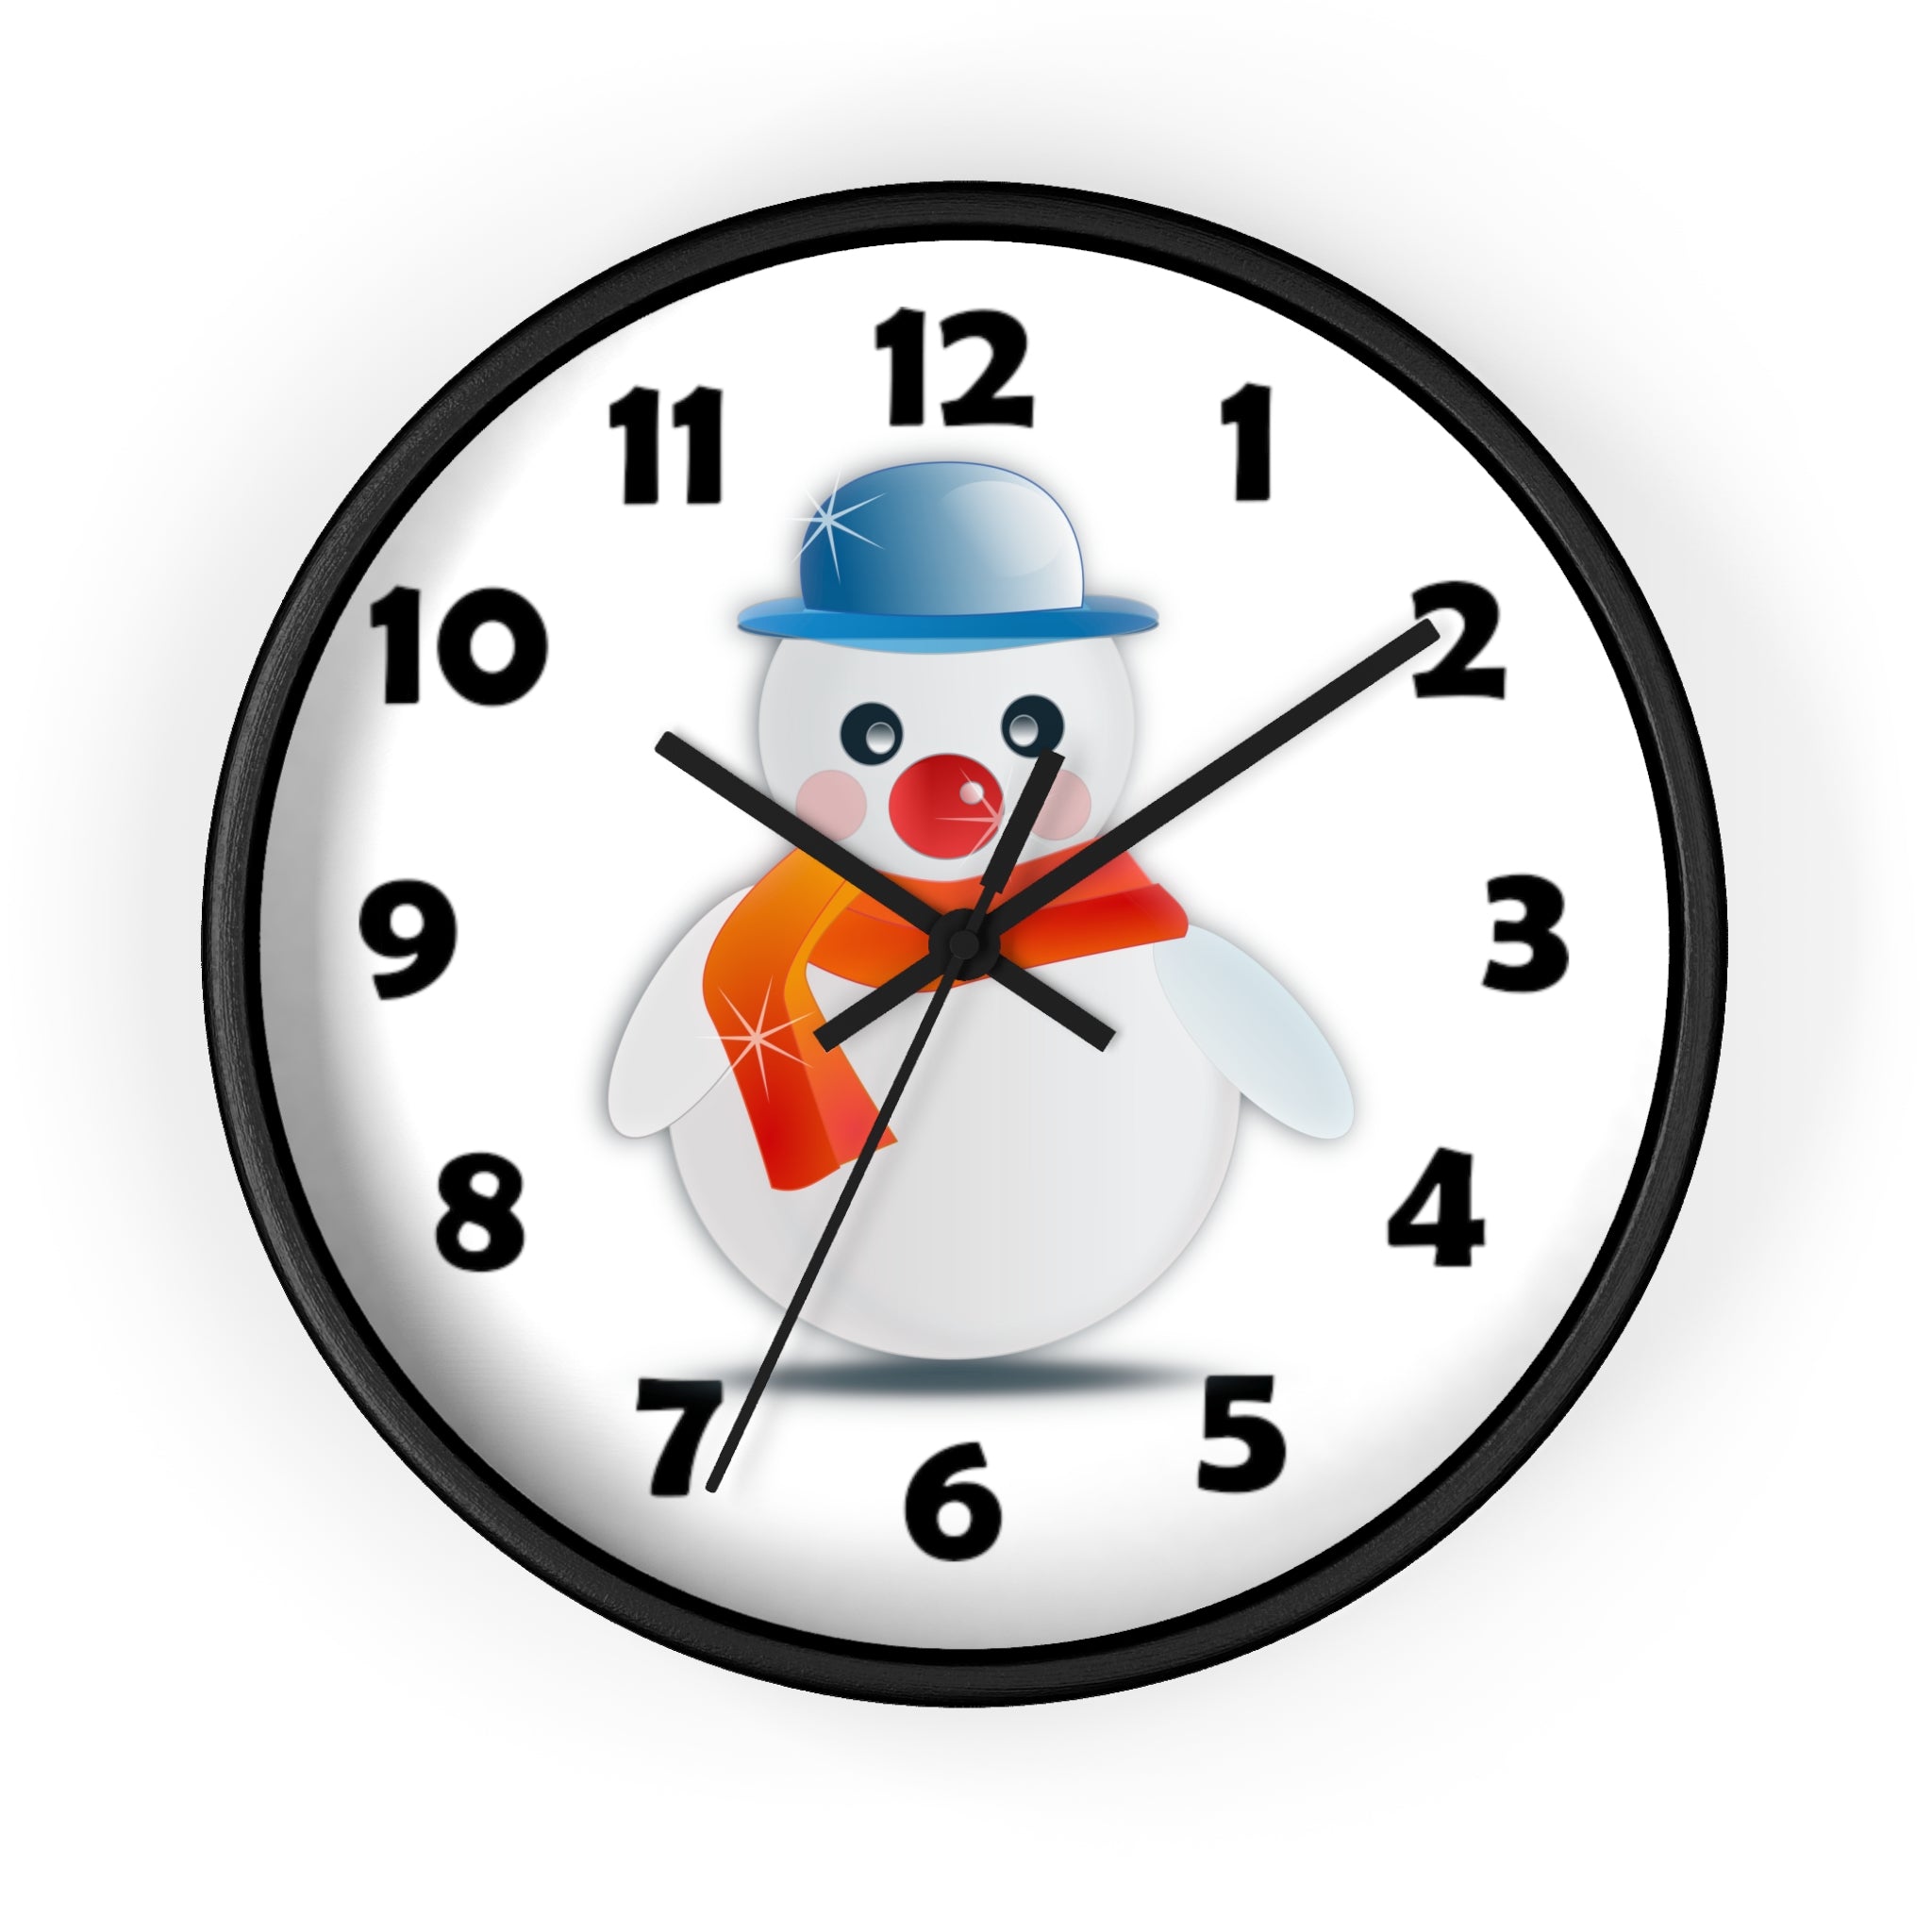 10 inch round wall clock with a snowman in the middle